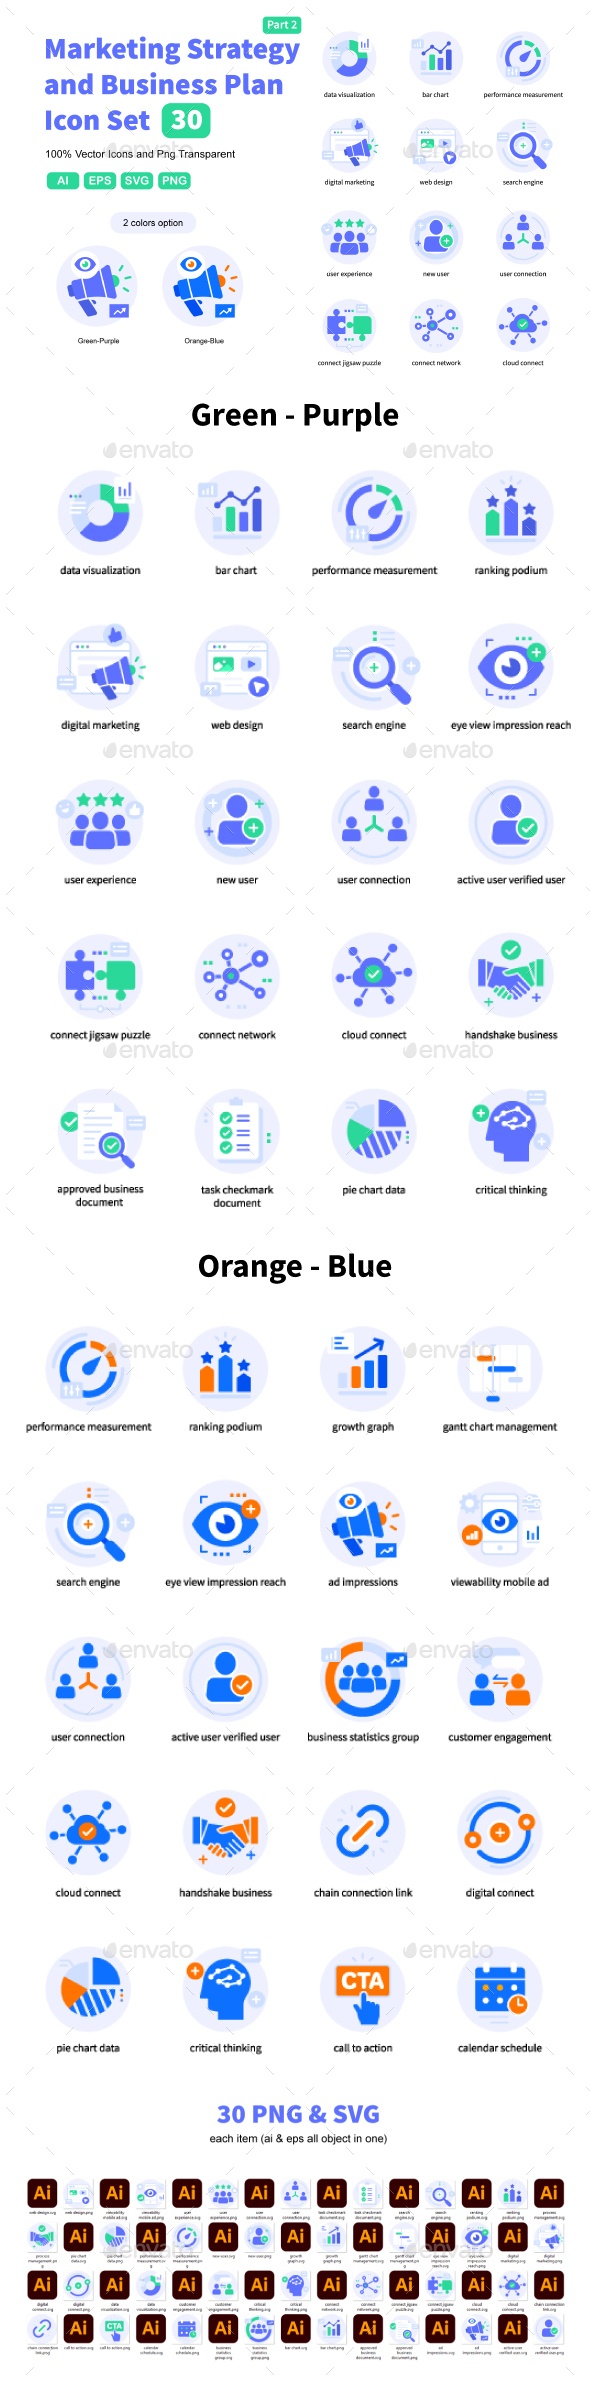 [DOWNLOAD]Marketing Strategy and Business Plan Icon Set Part 2